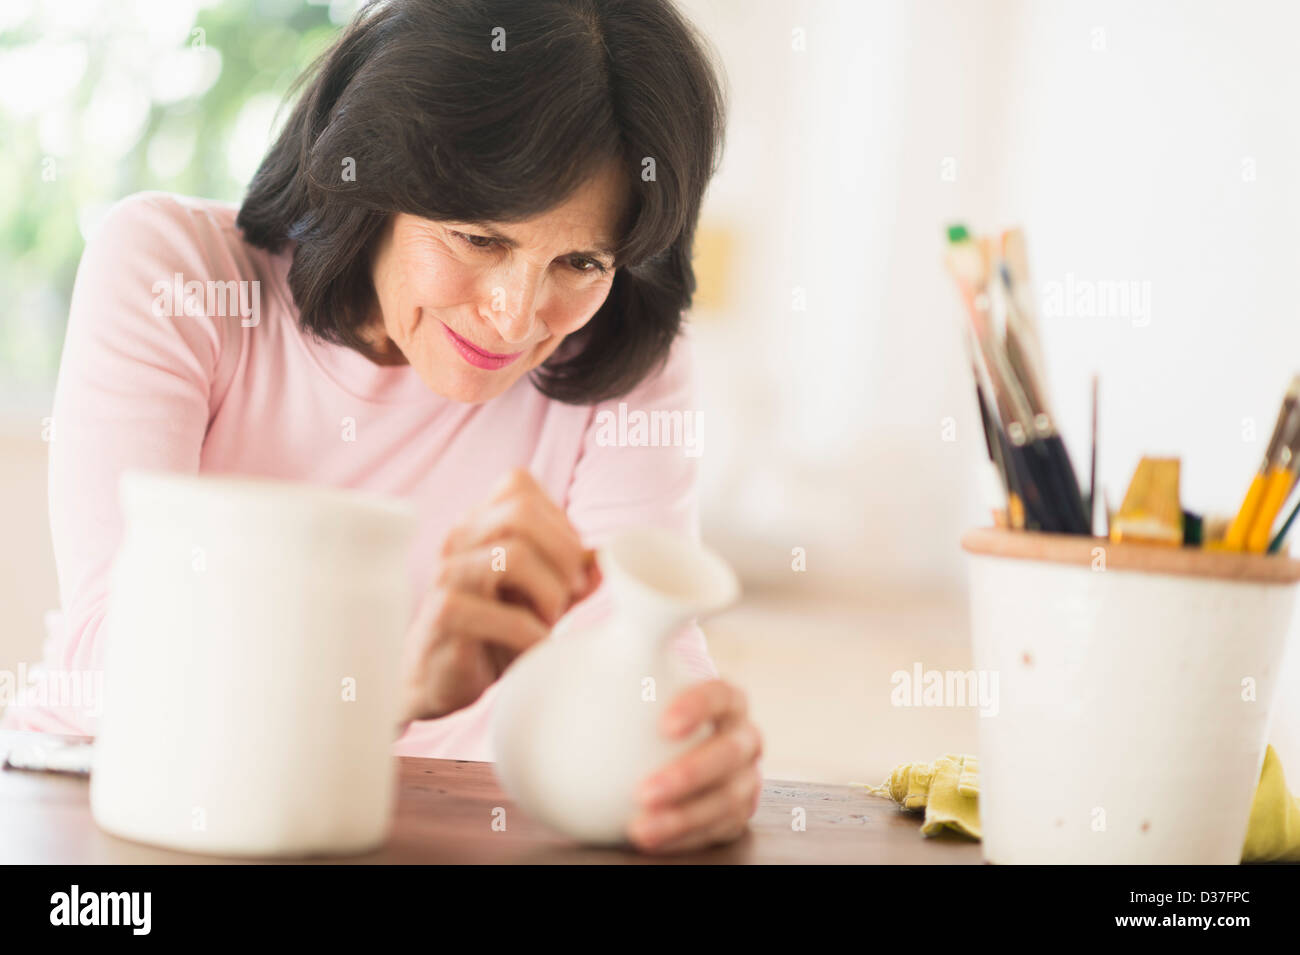 USA, New Jersey, Jersey City, Senior woman painting poterie fait main Banque D'Images